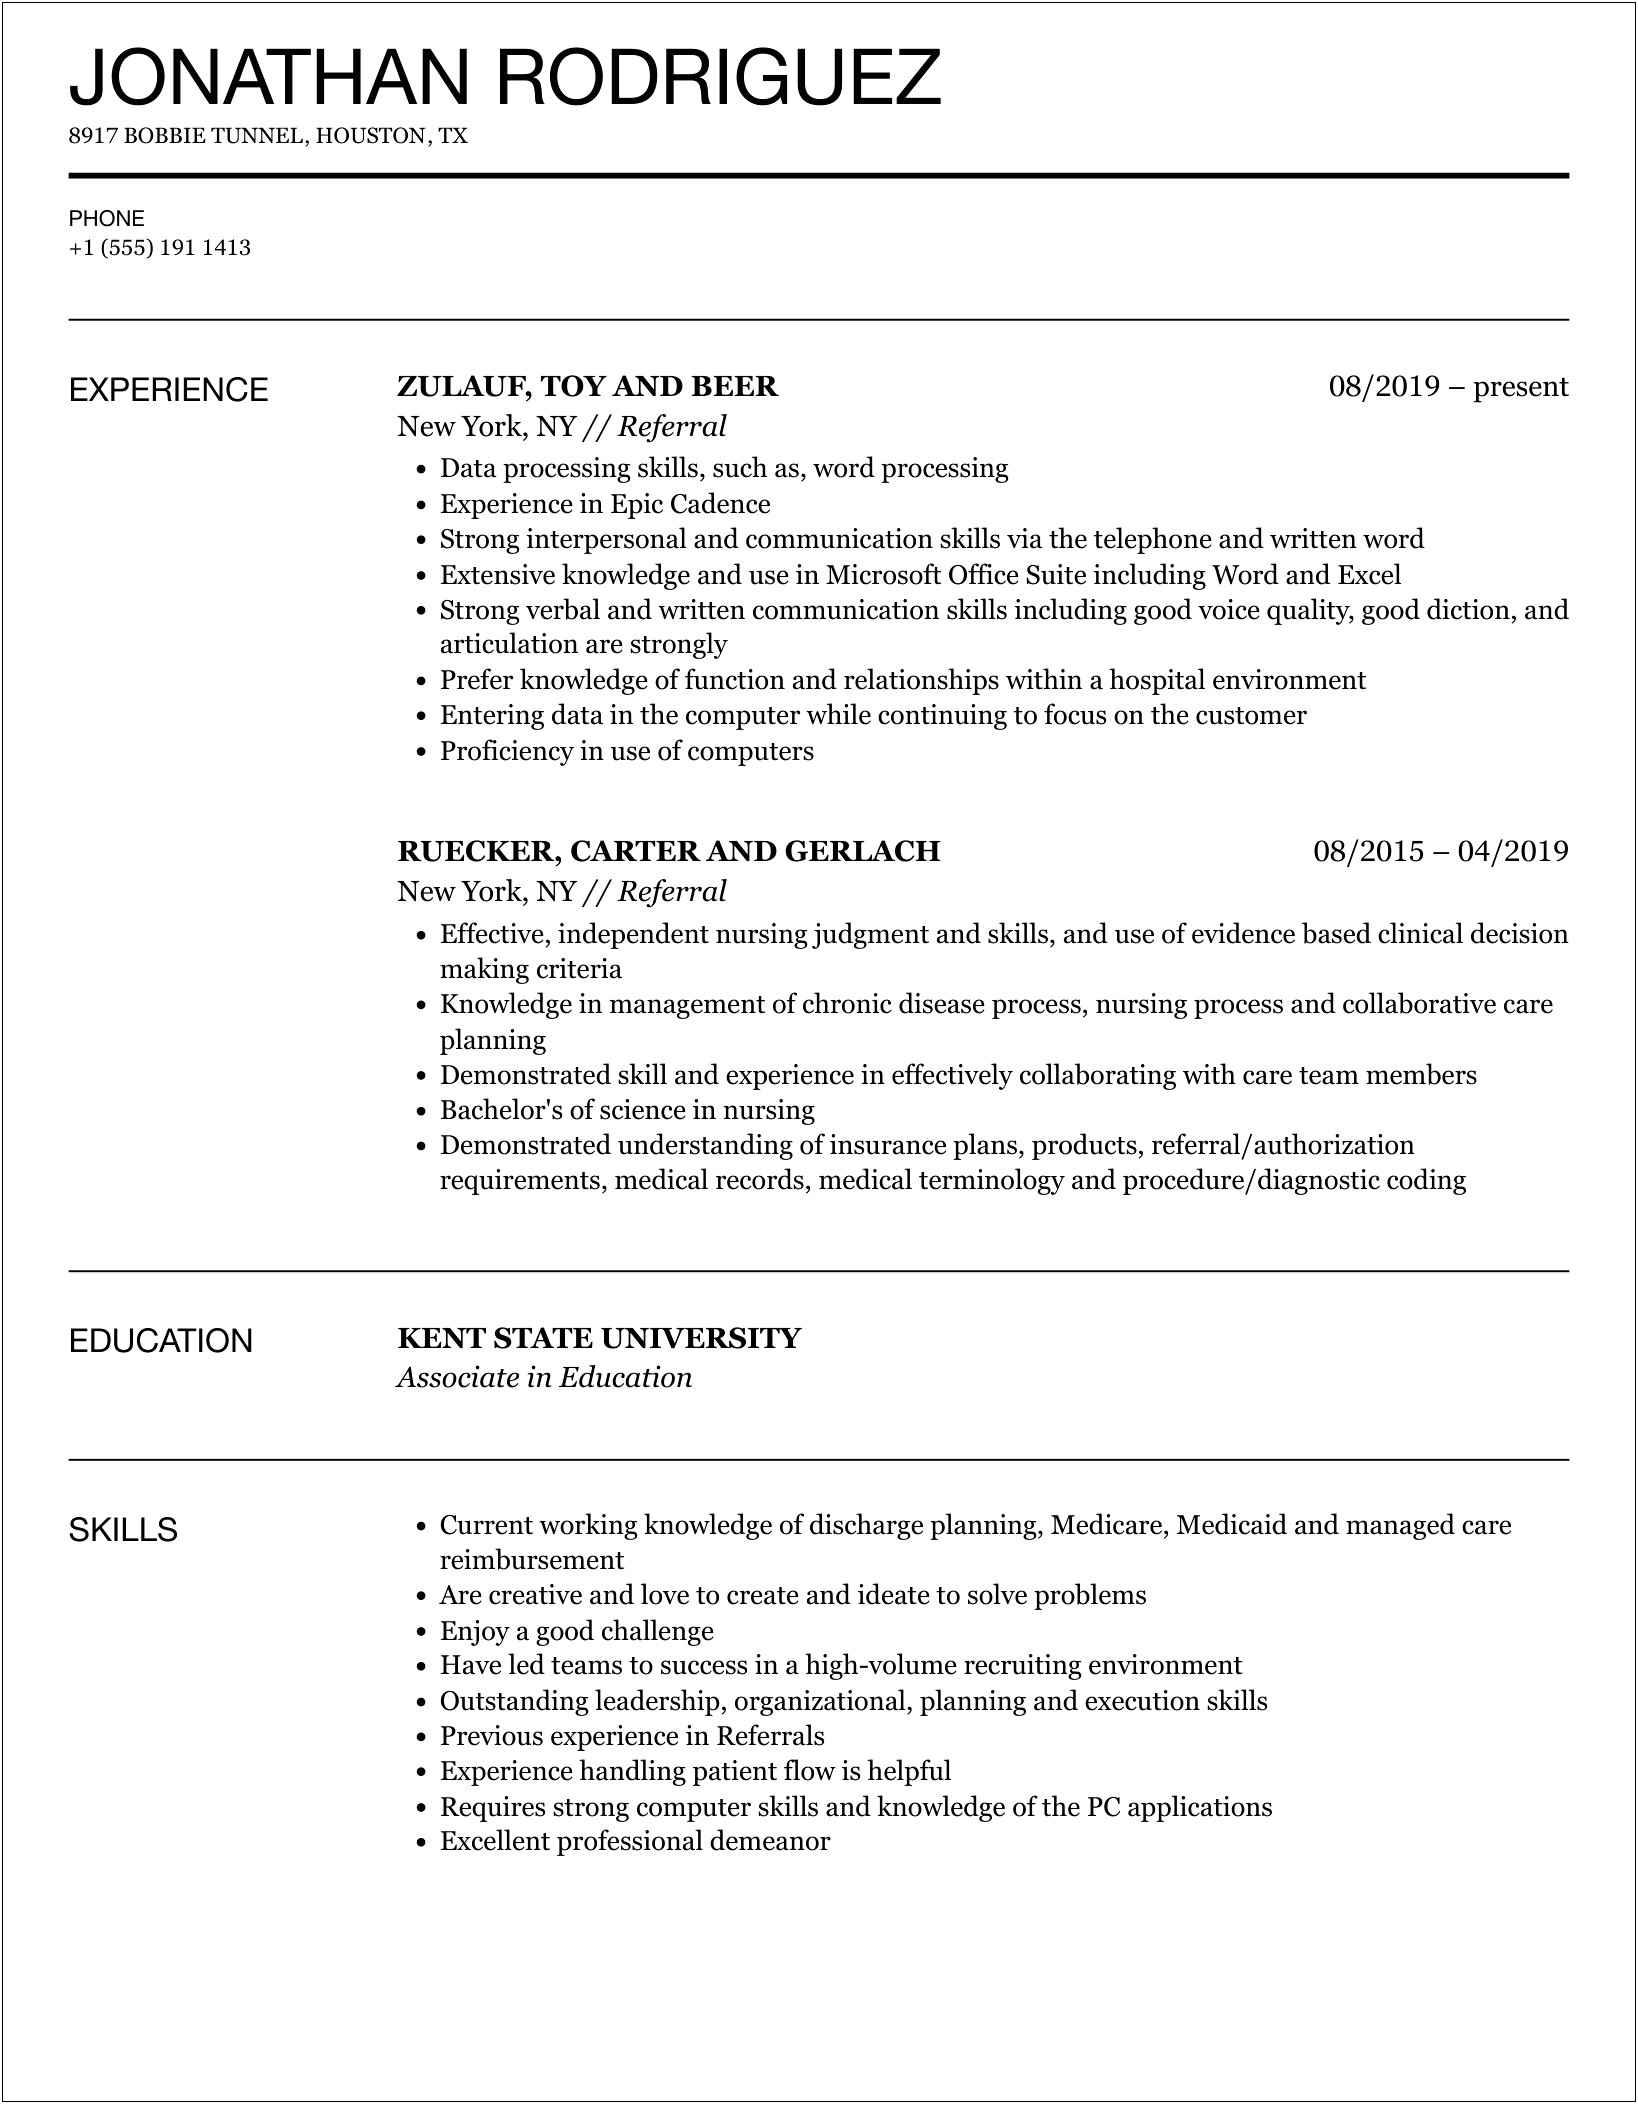 Sample Email To Send Resume To Referral